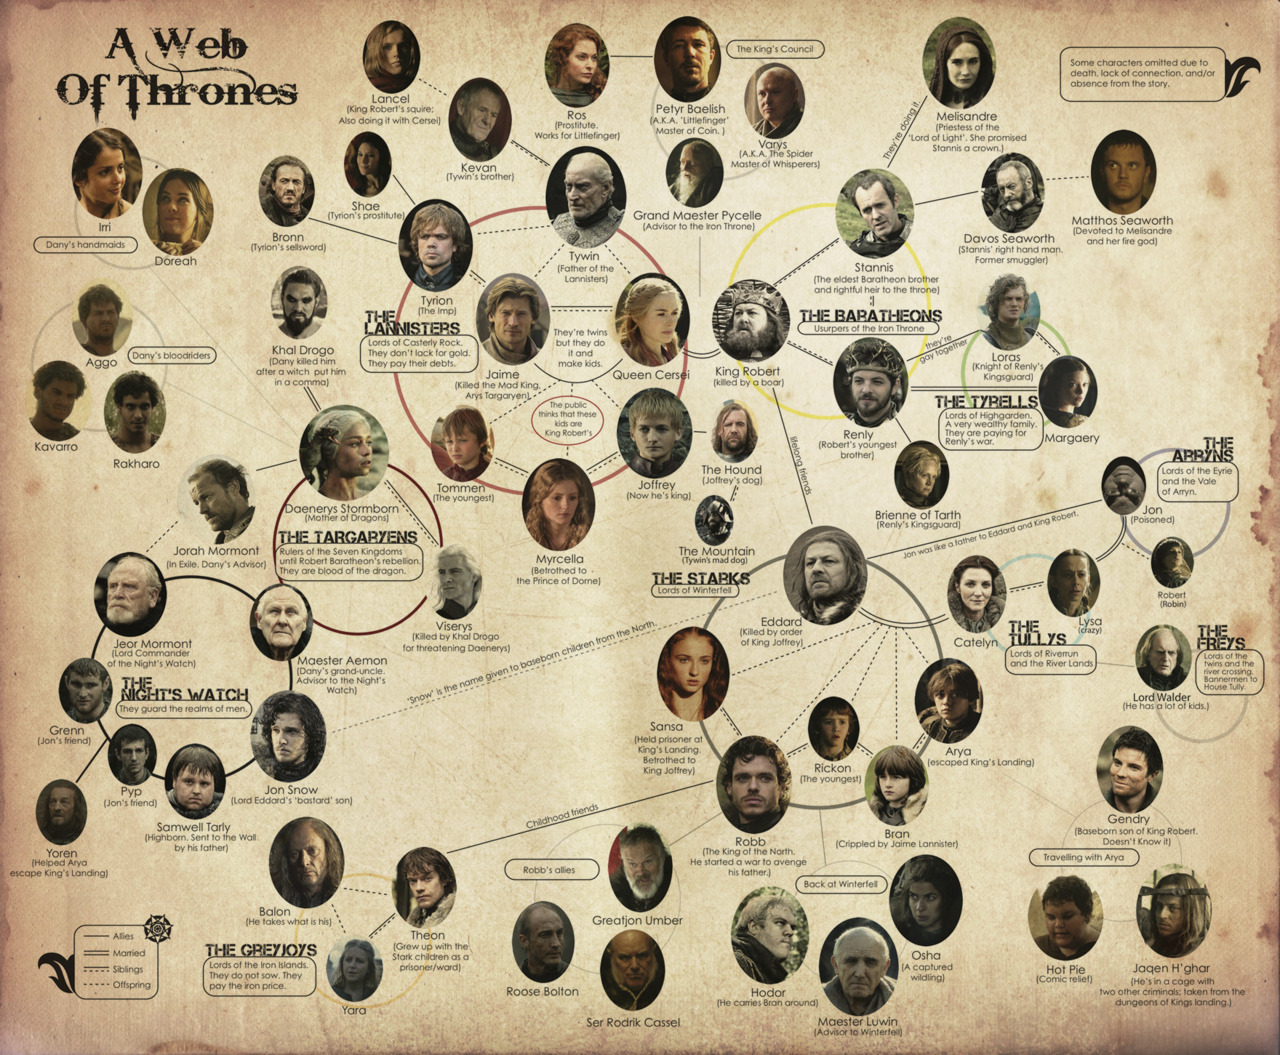 A-Web-of-Thrones-game-of-thrones-30670278-1280-1055.jpg